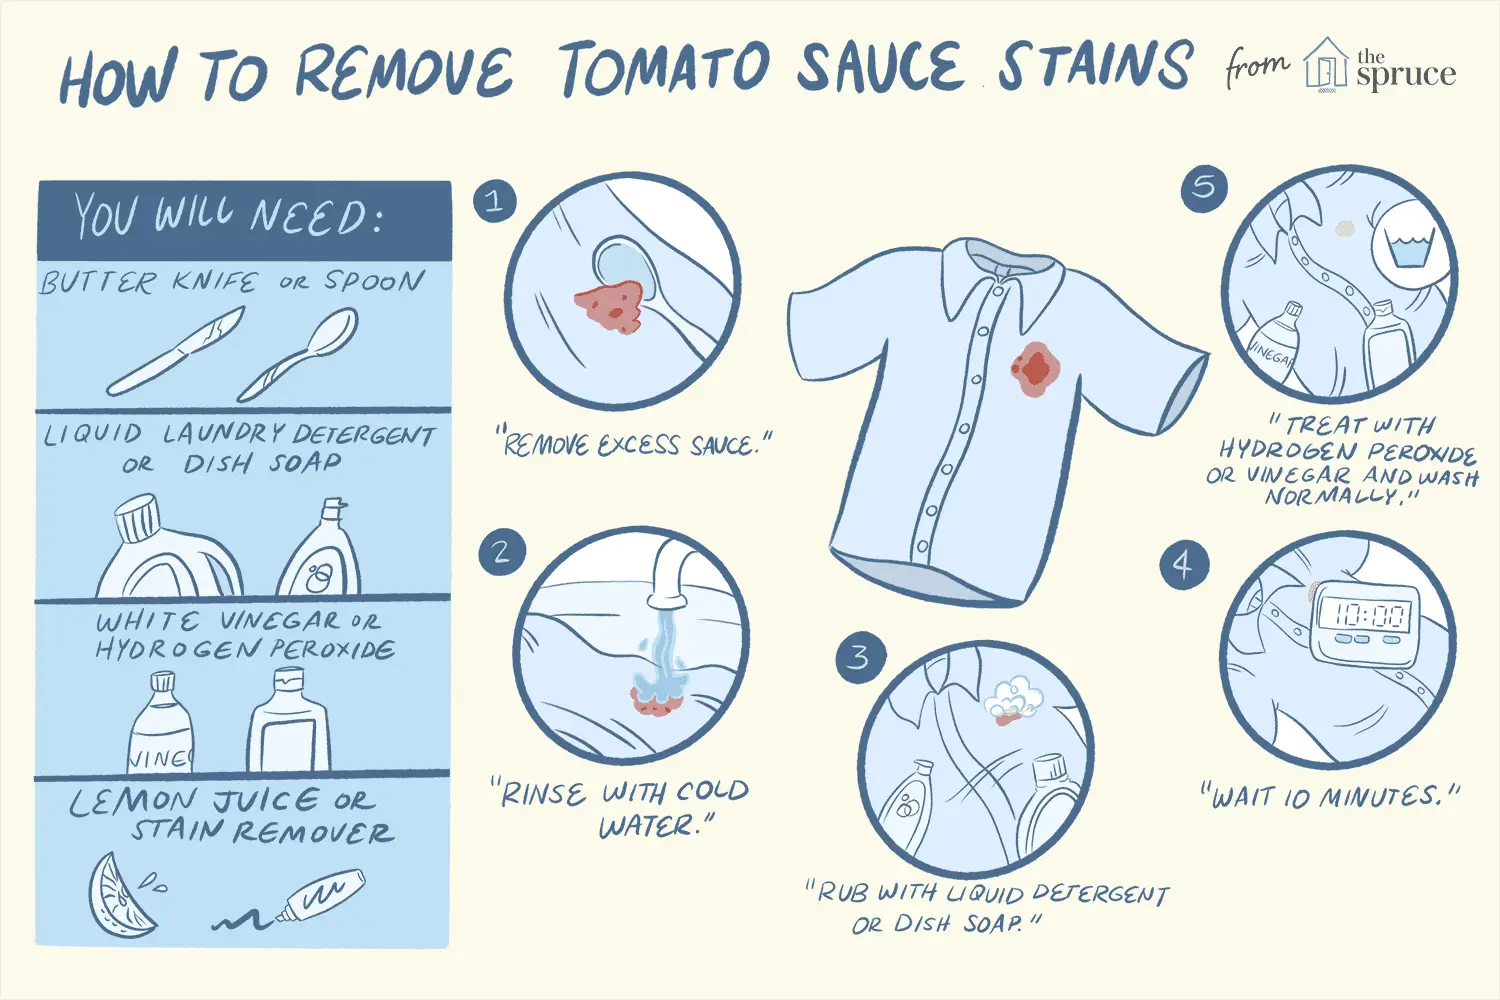 Removing Tomato Sauce Stains From Clothing (With images)